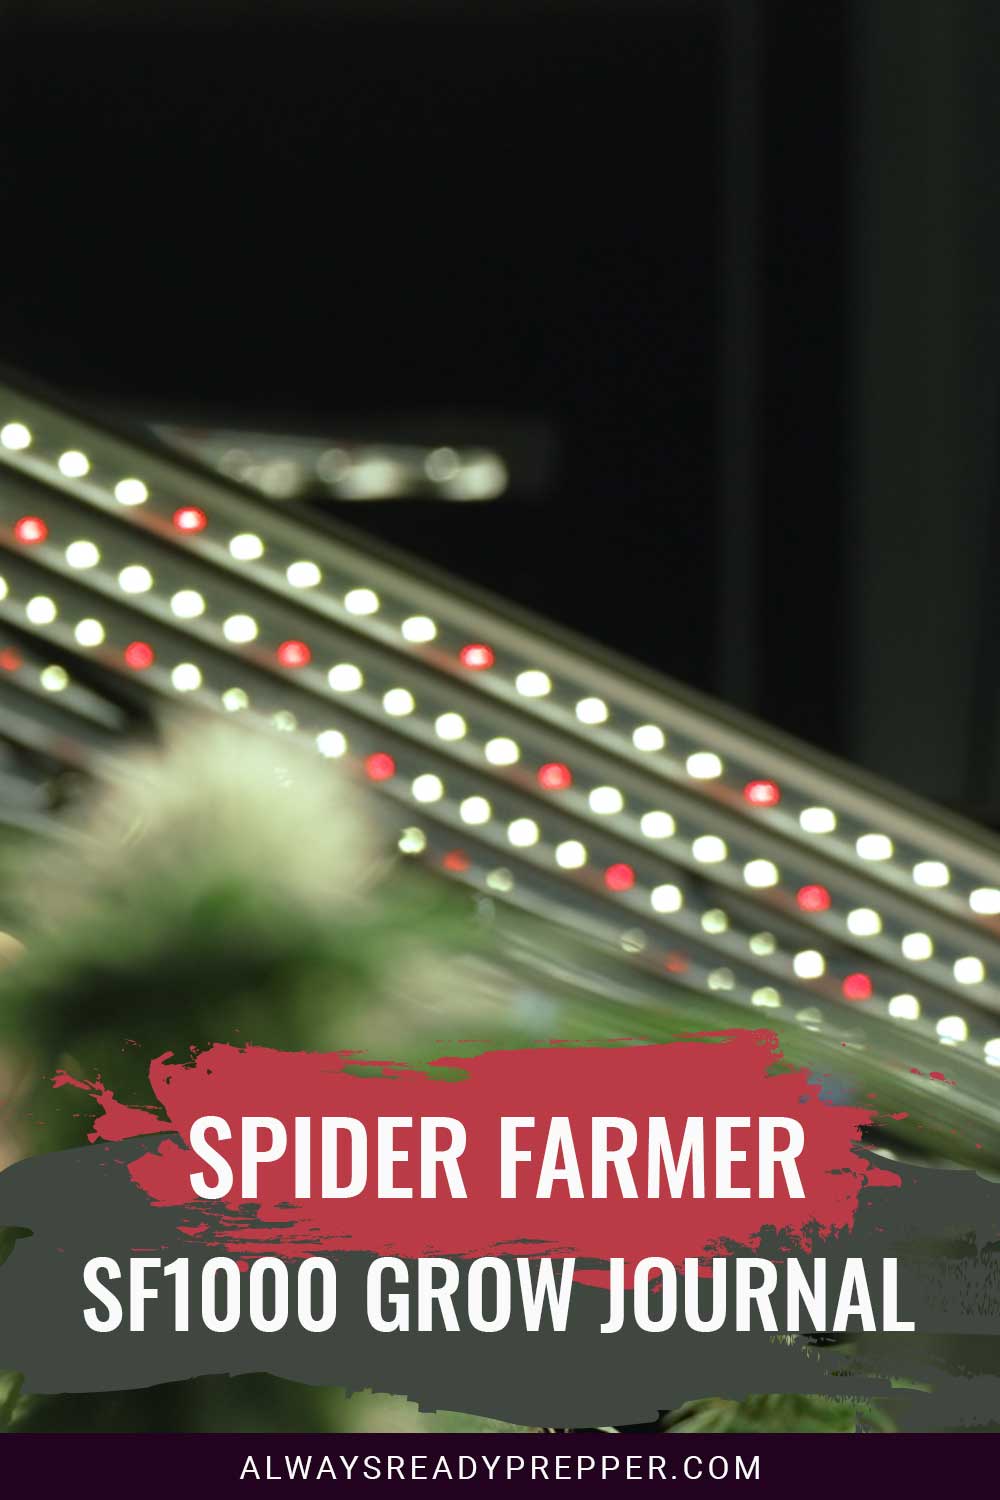 Indoor farming and LED lights - Spider Farmer SF1000 Grow Journal